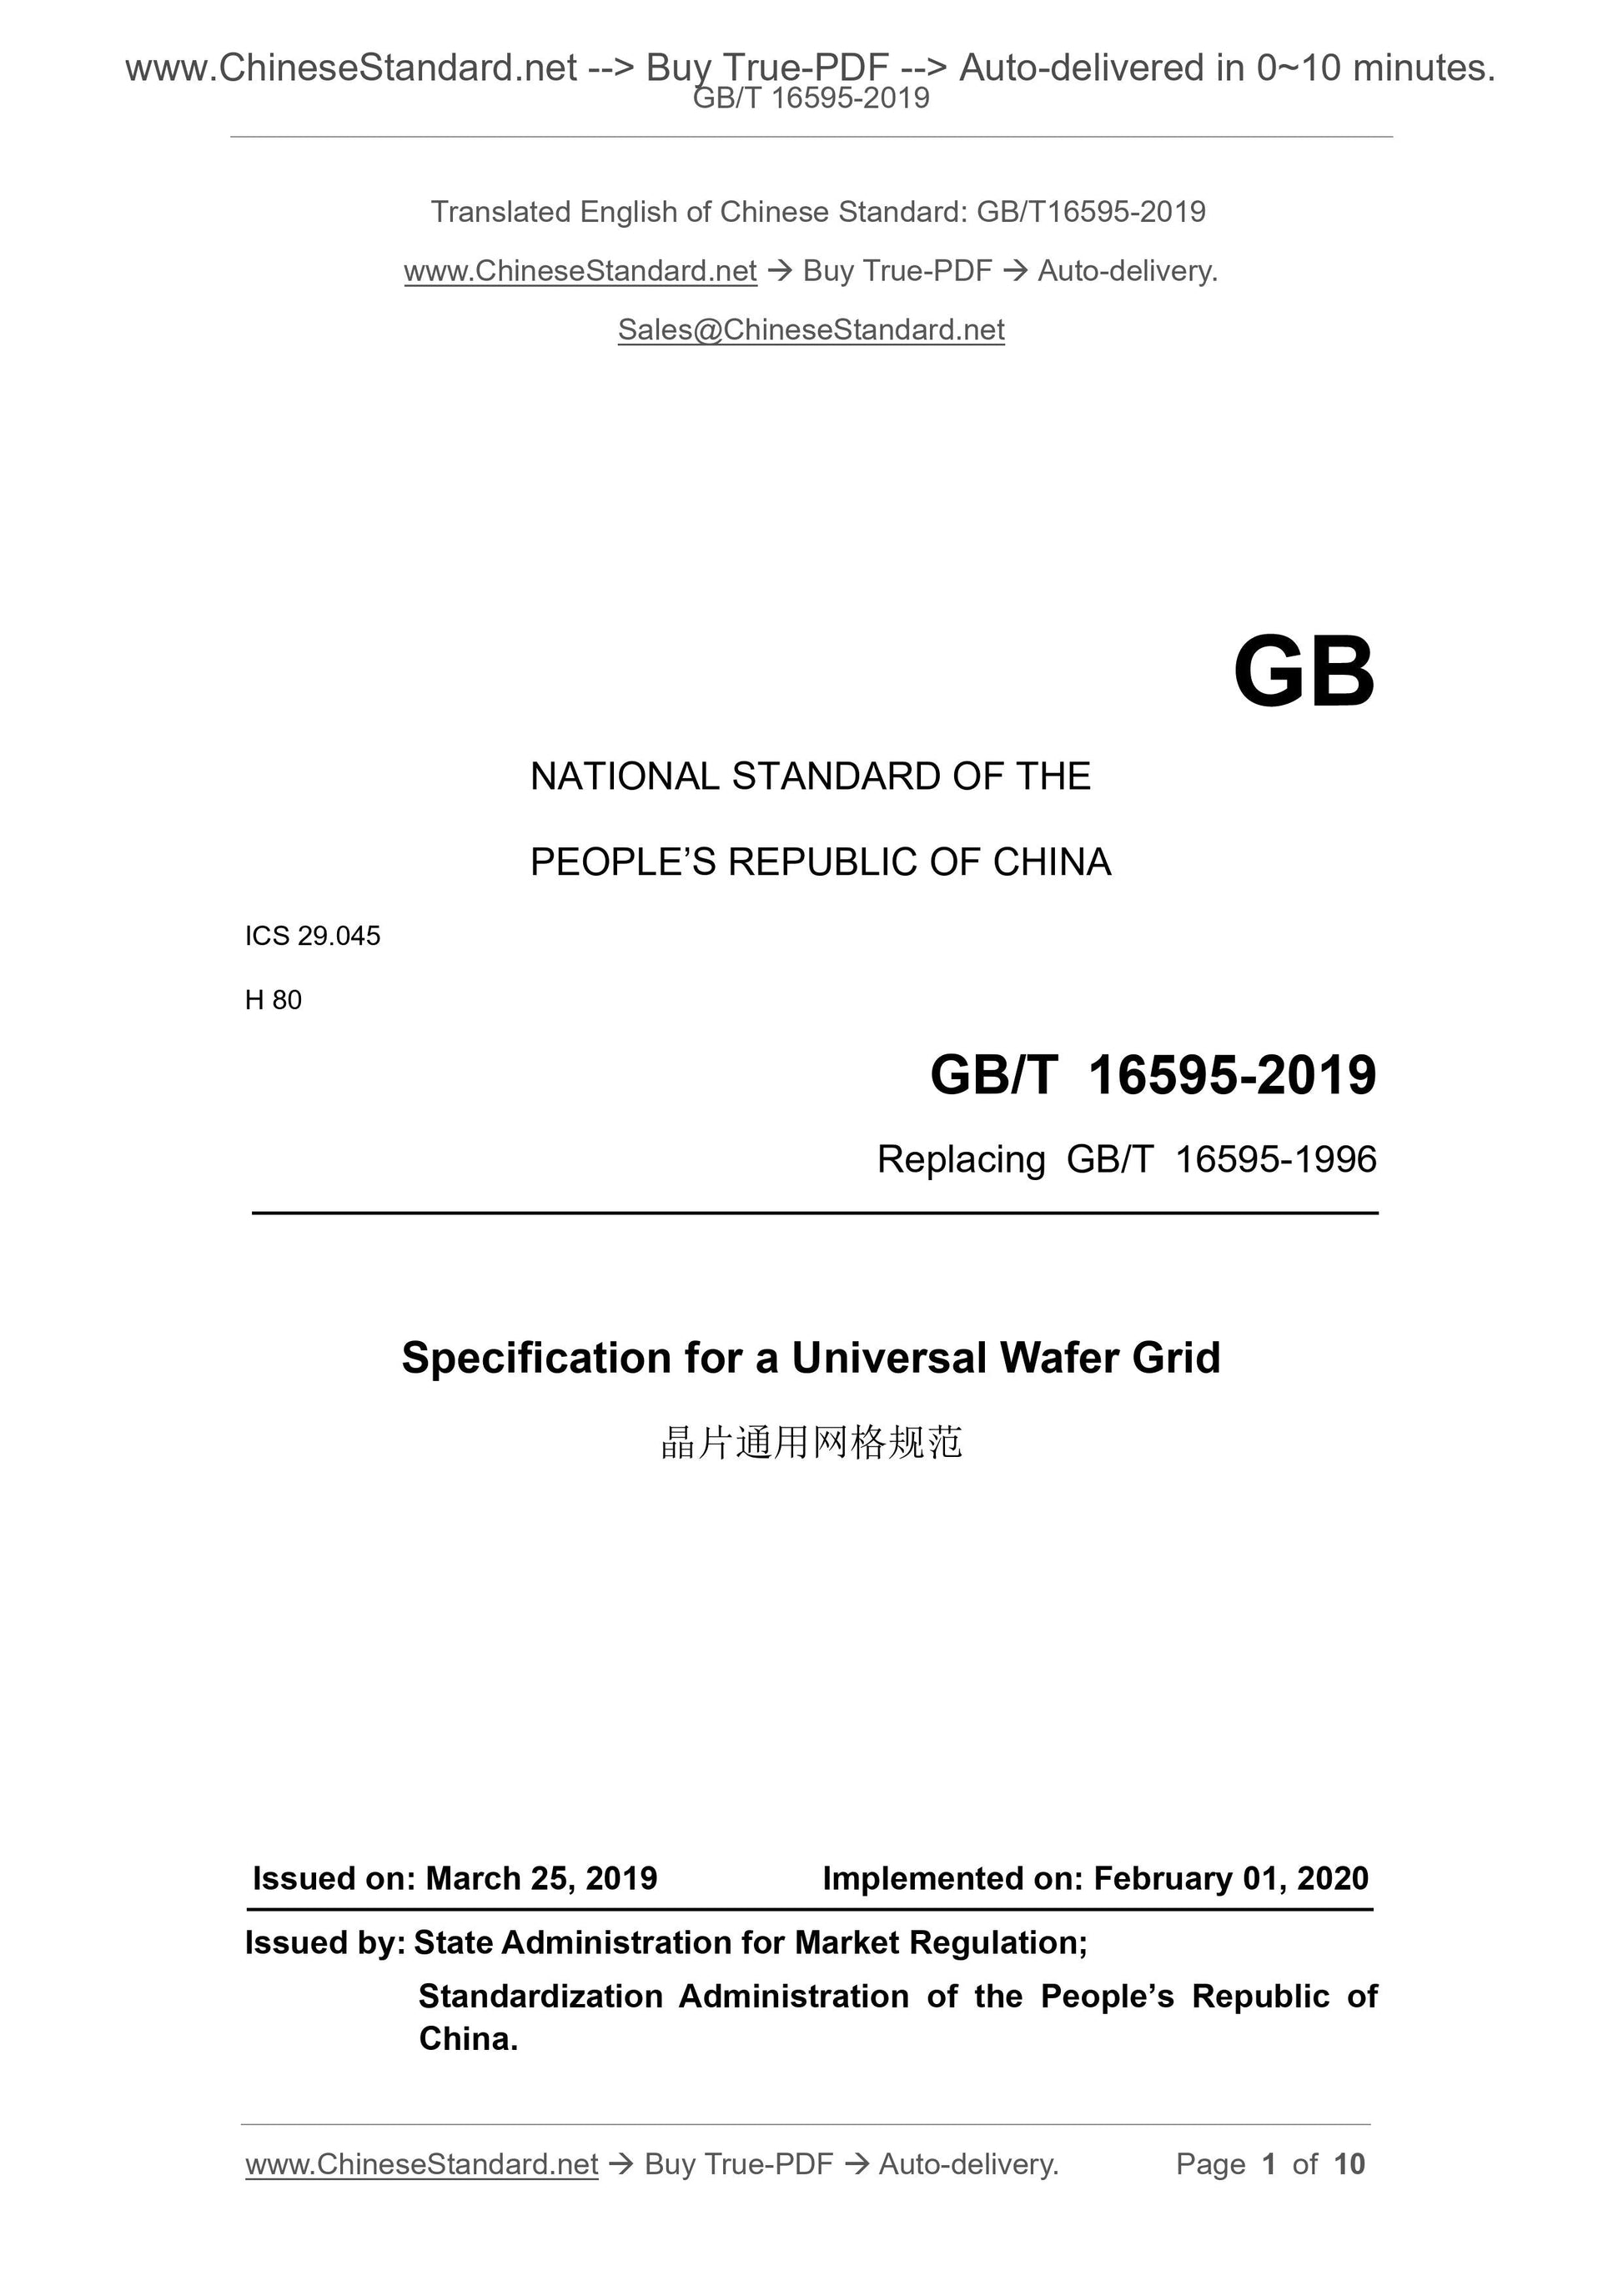 GB/T 16595-2019 Page 1